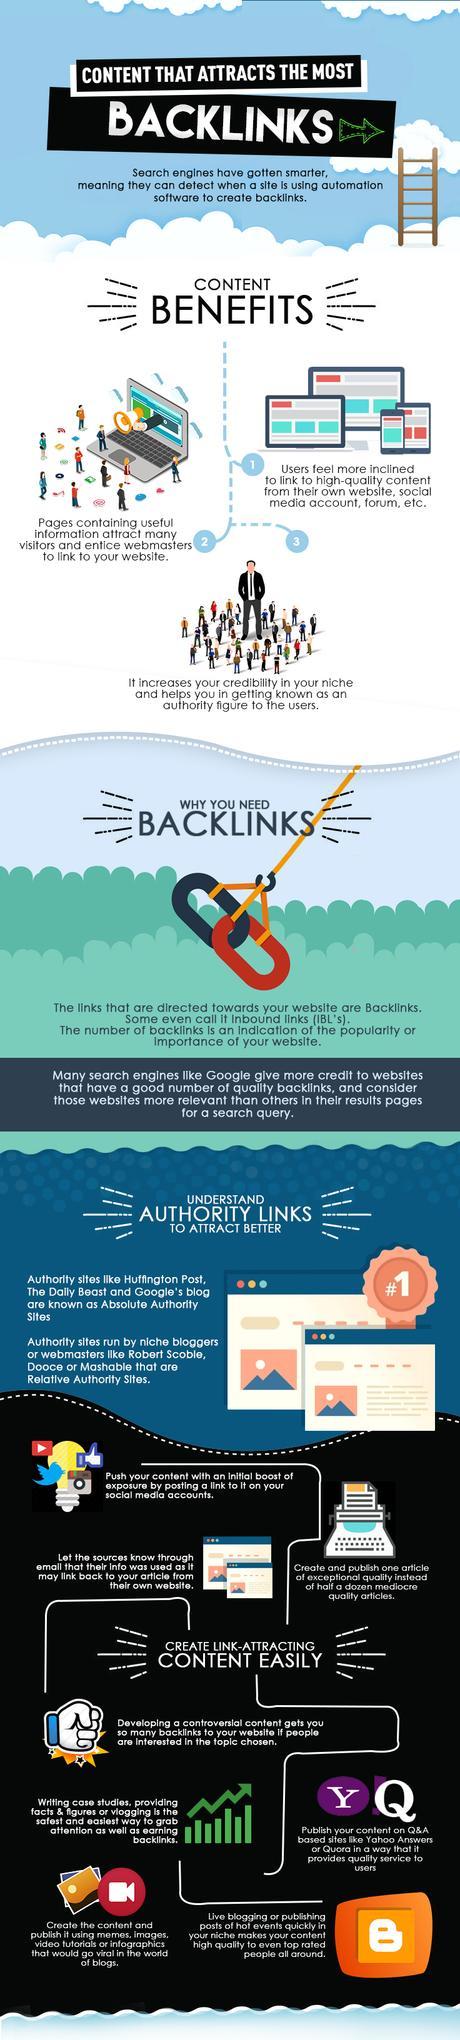 How Content Attracts The Most BackLinks